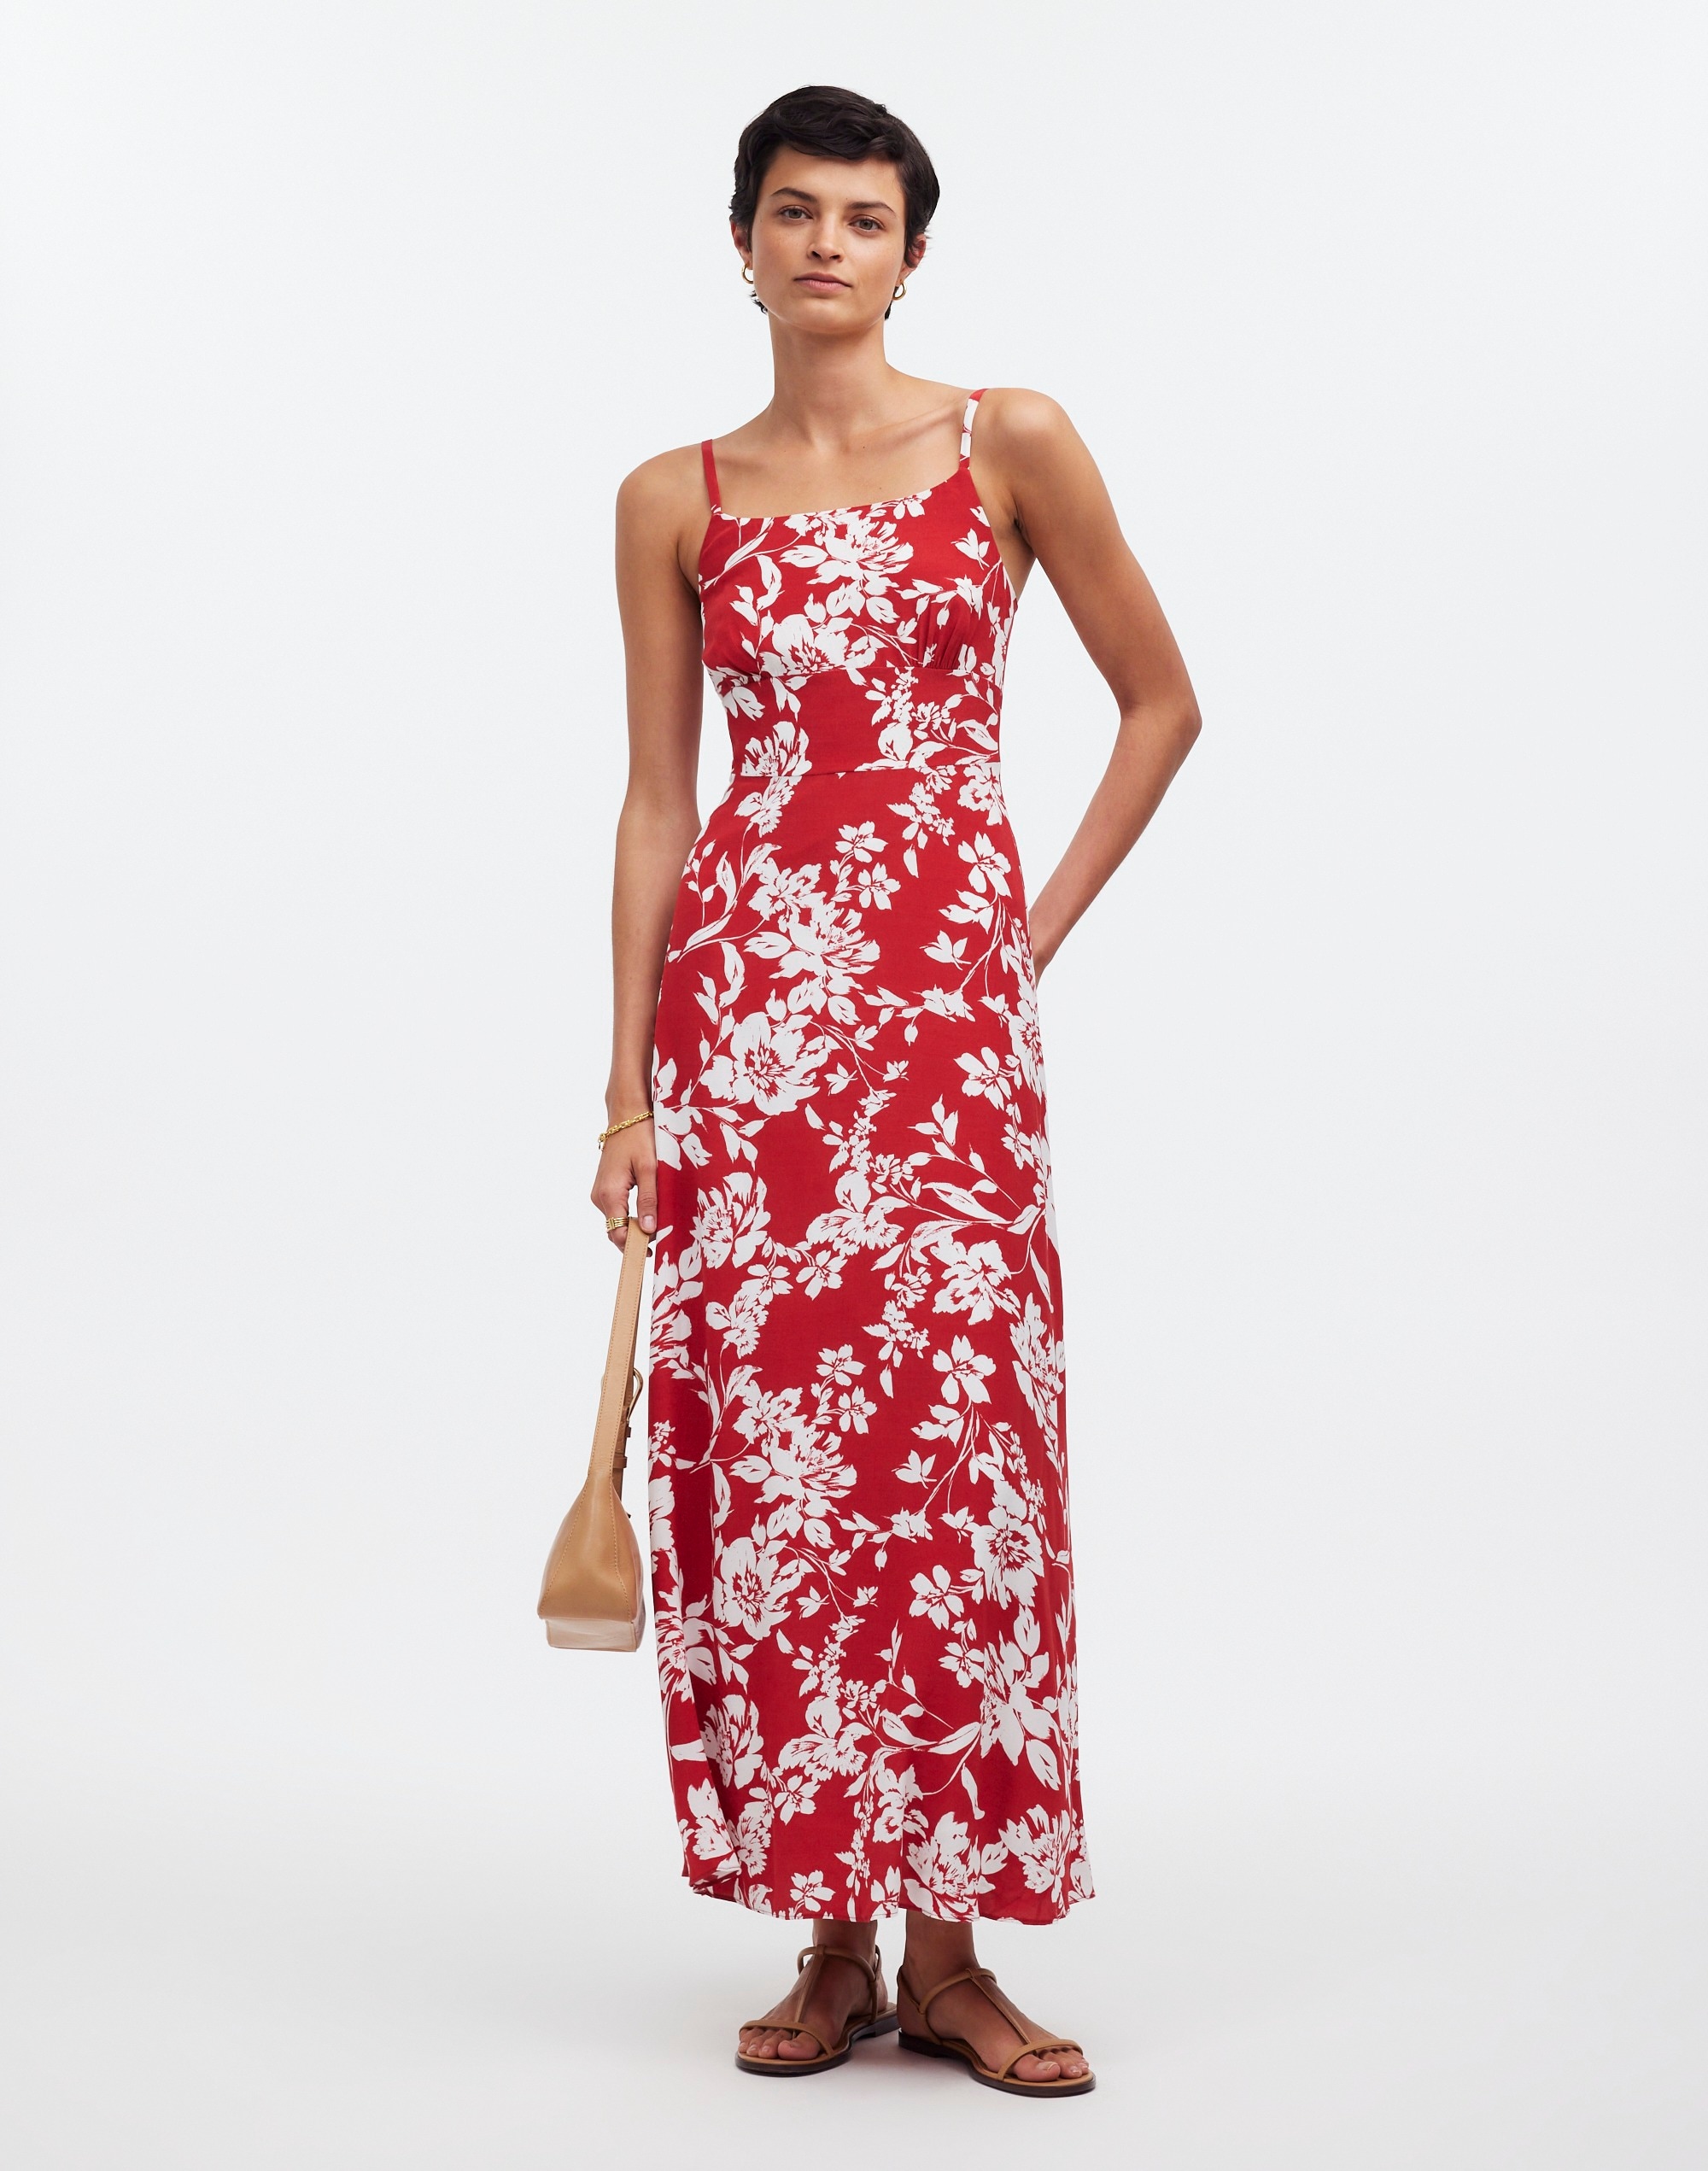 Mw Square-neck Tank Dress In Exploded Red Floral